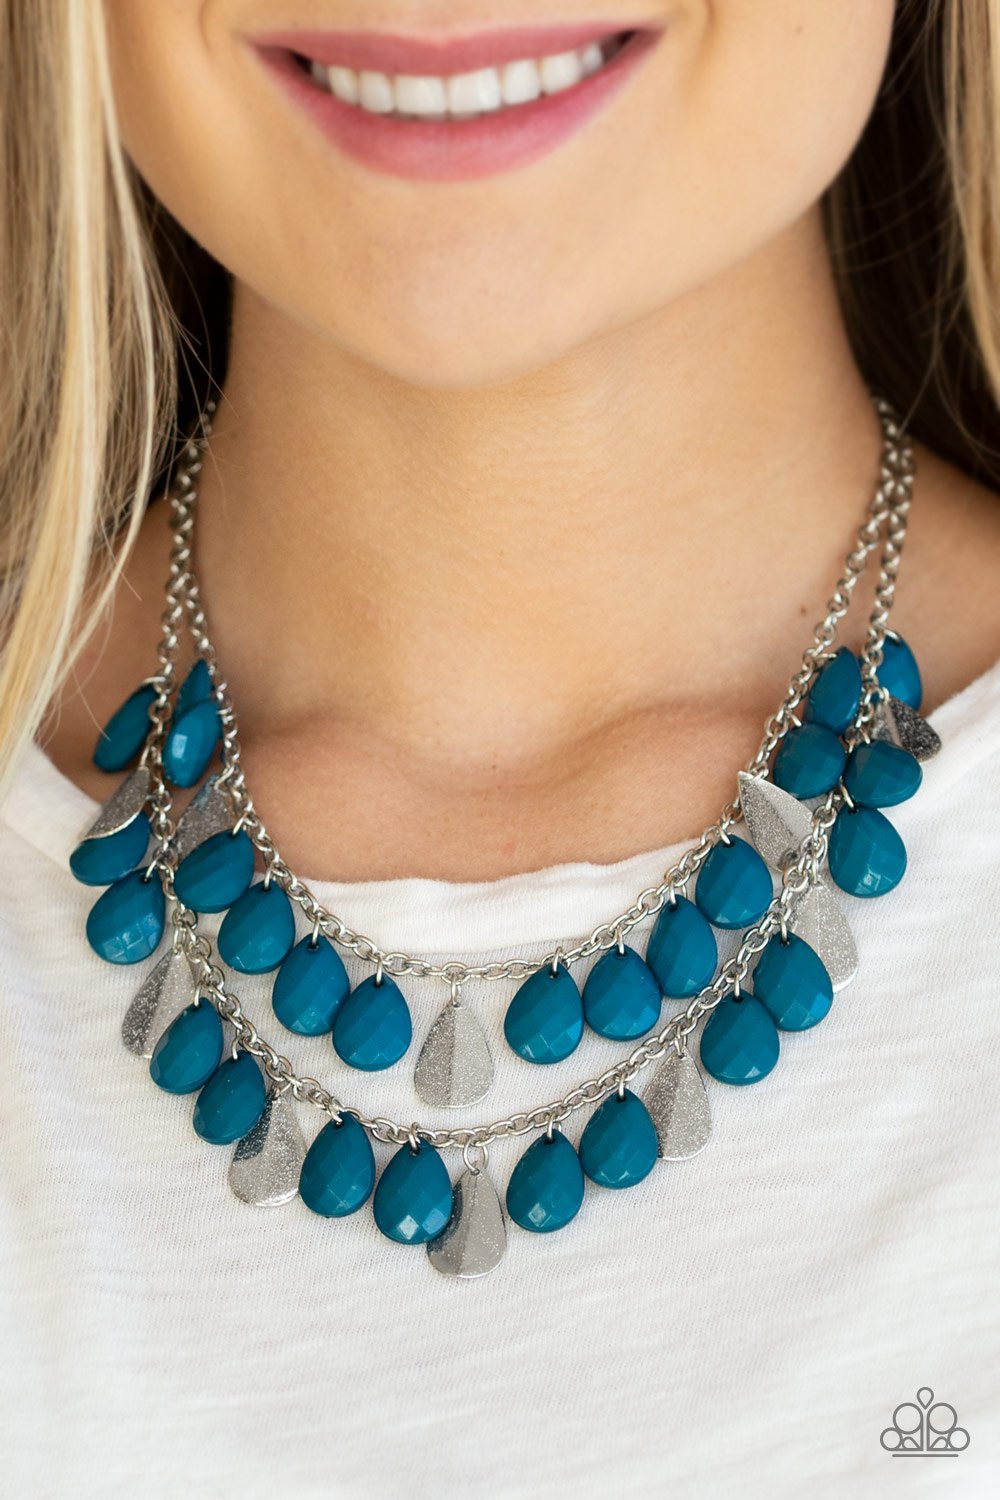 Life of the Fiesta - blue - Paparazzi necklace